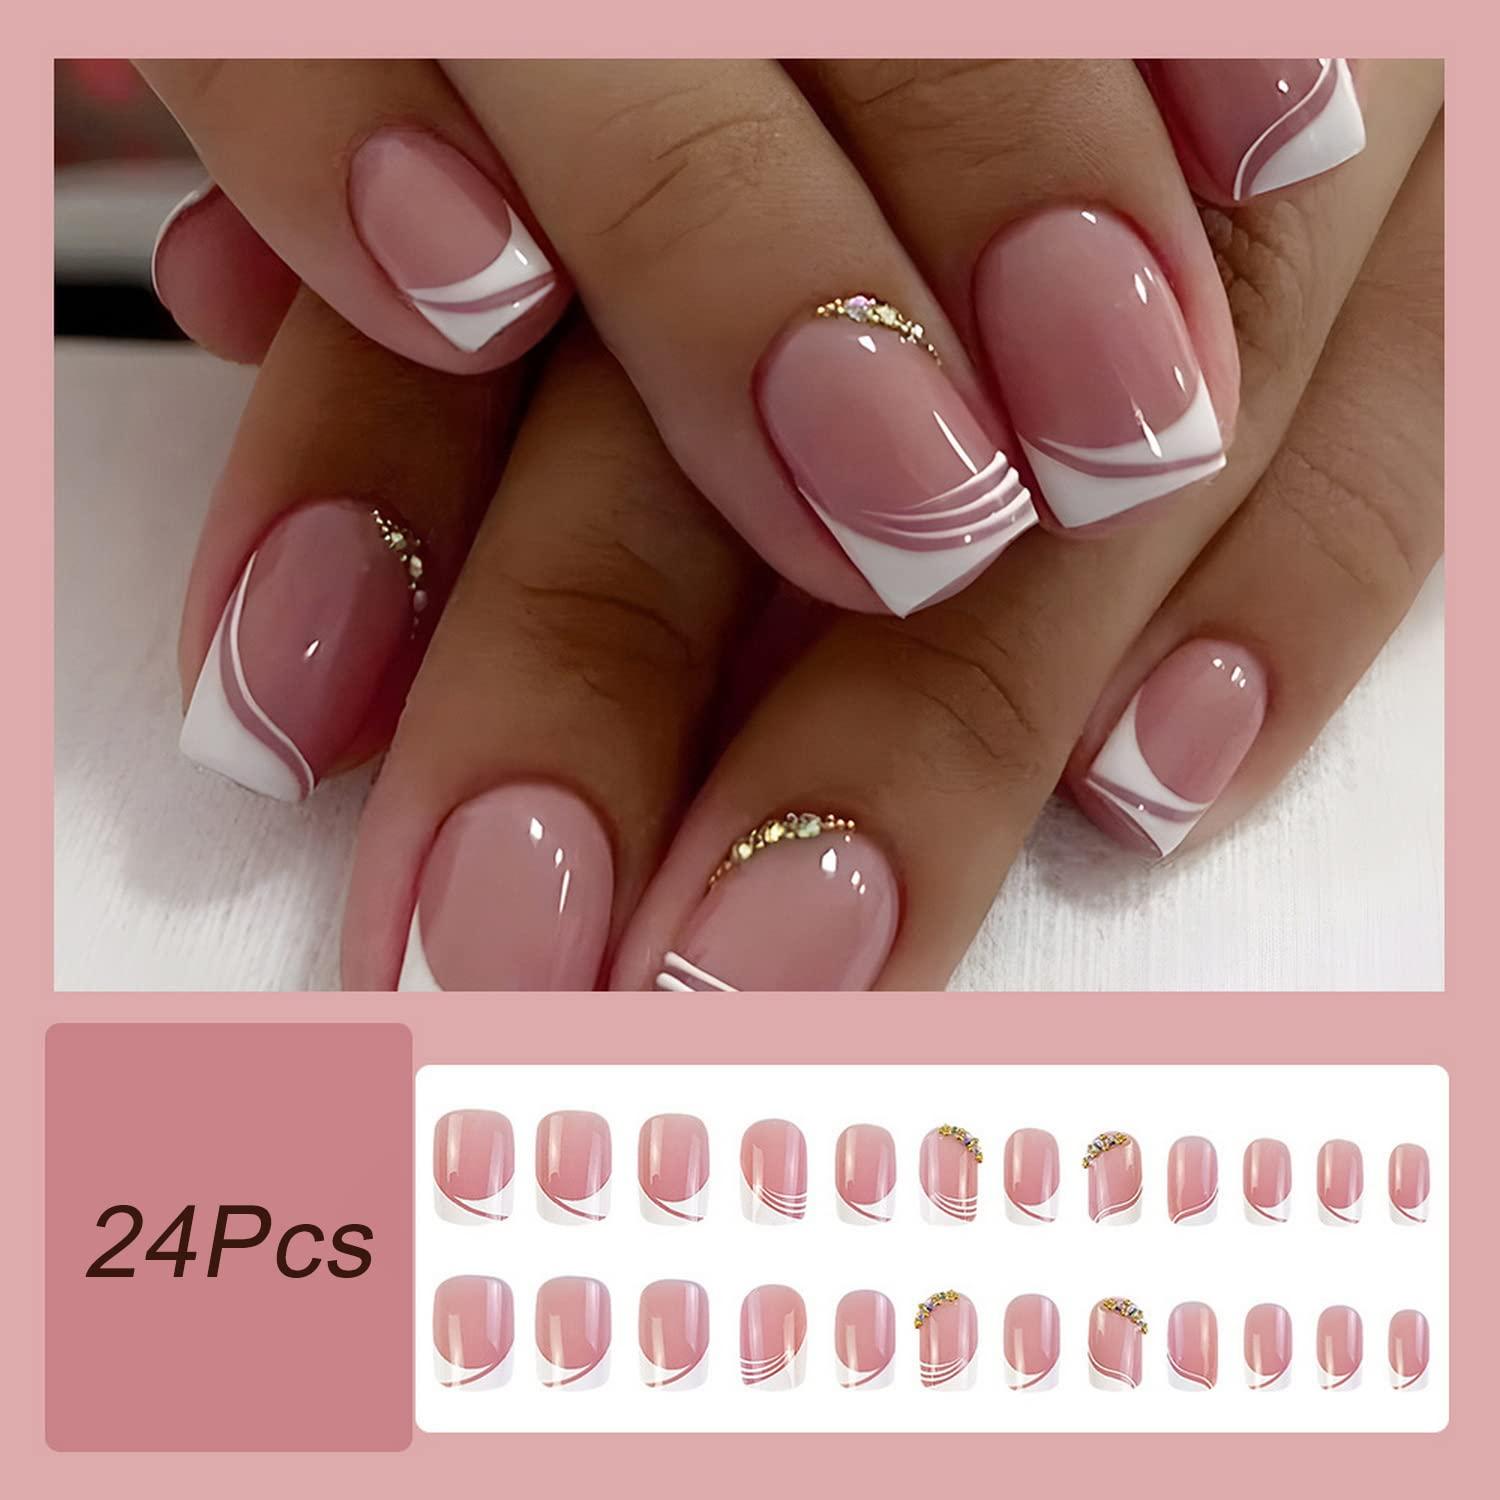 High Quantity Acrylic Powder Carving Nail Polymer Tip Extension French Pink  White Clear Adhesive Rhinestone Nail Art Supplies - AliExpress